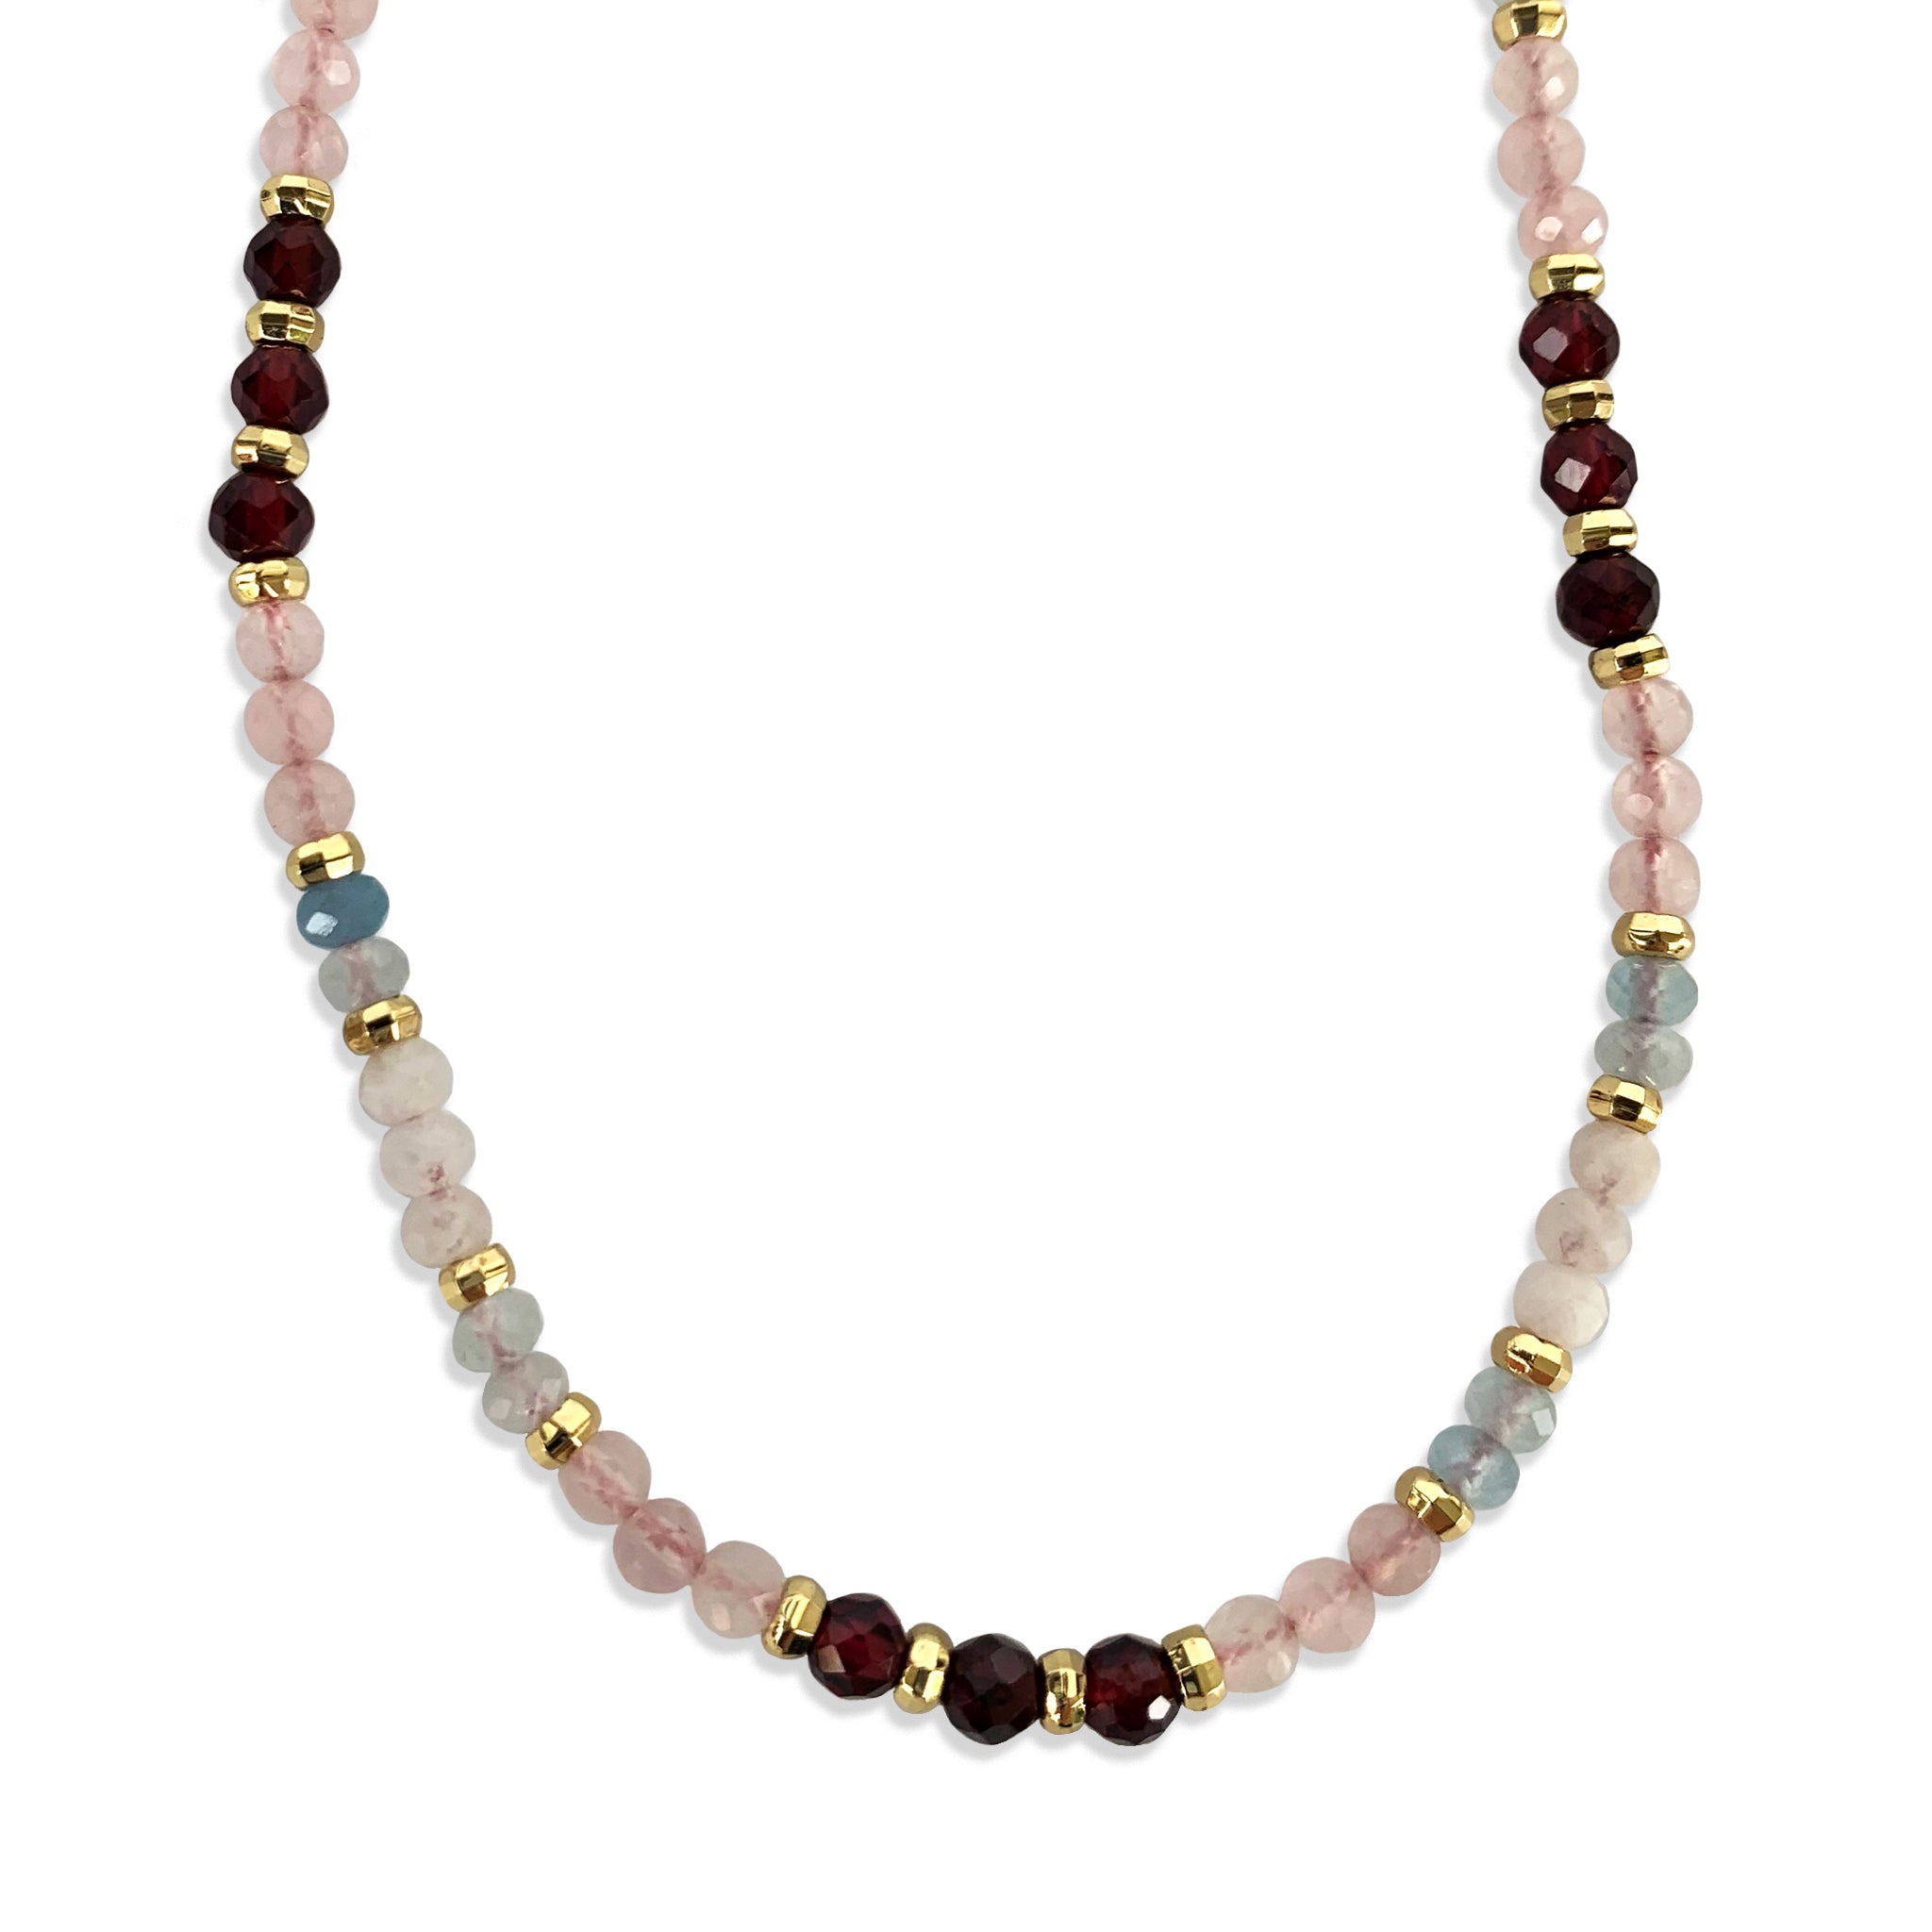 Fertility Faceted Gemstone Necklace